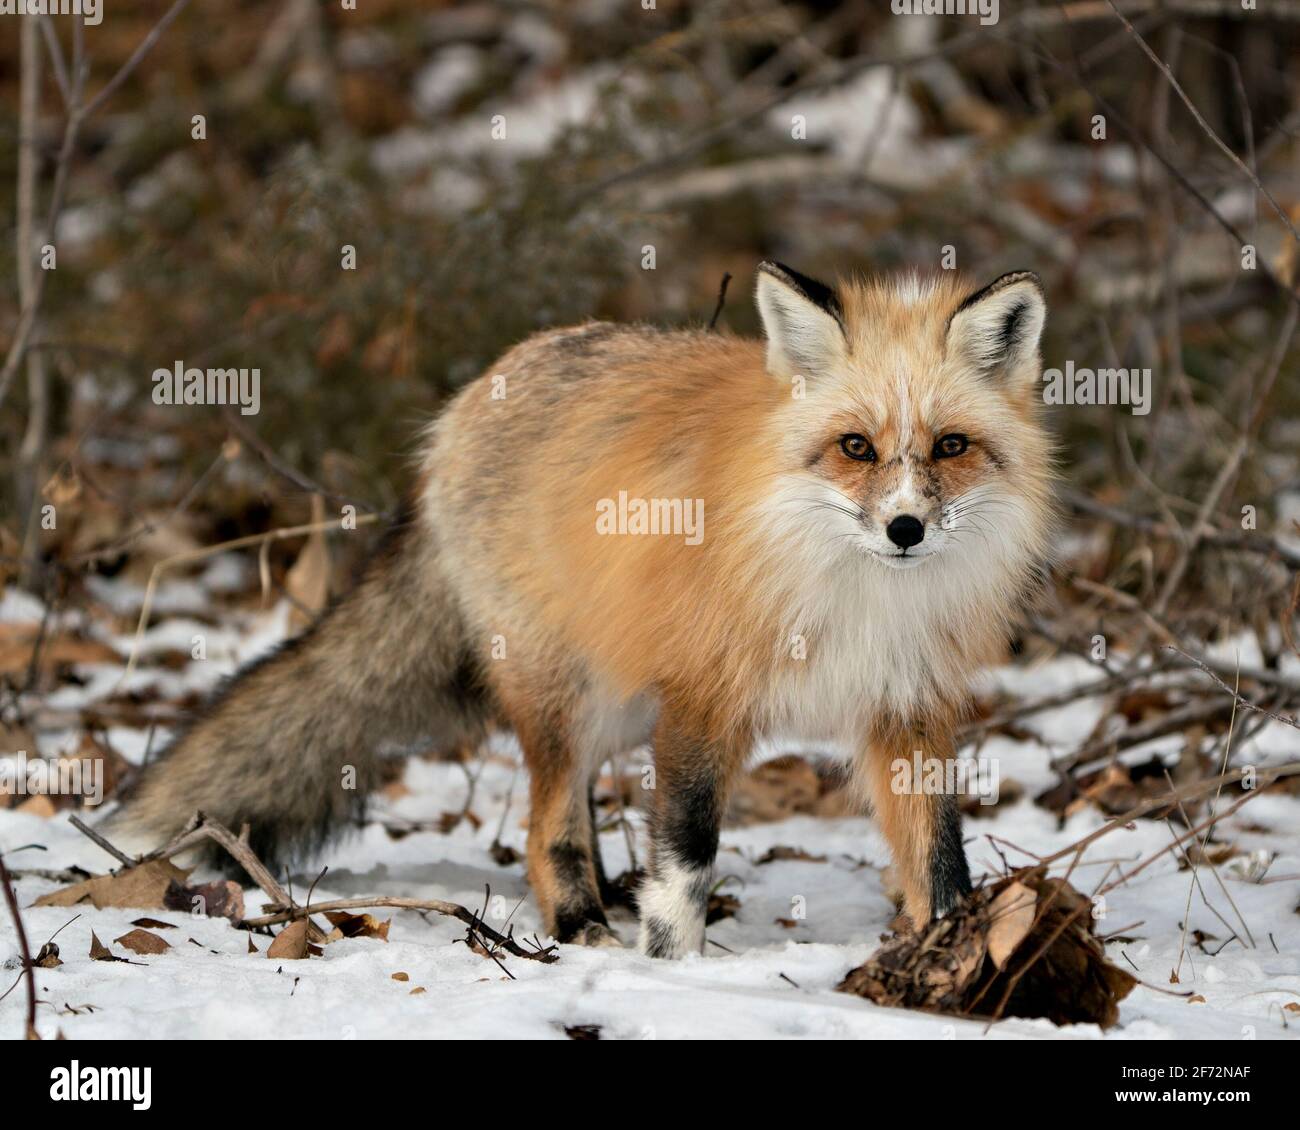 Red unique fox close-up profile walking towards you and looking at camera in the winter season in its habitat with blur snow background. Fox Image. Stock Photo